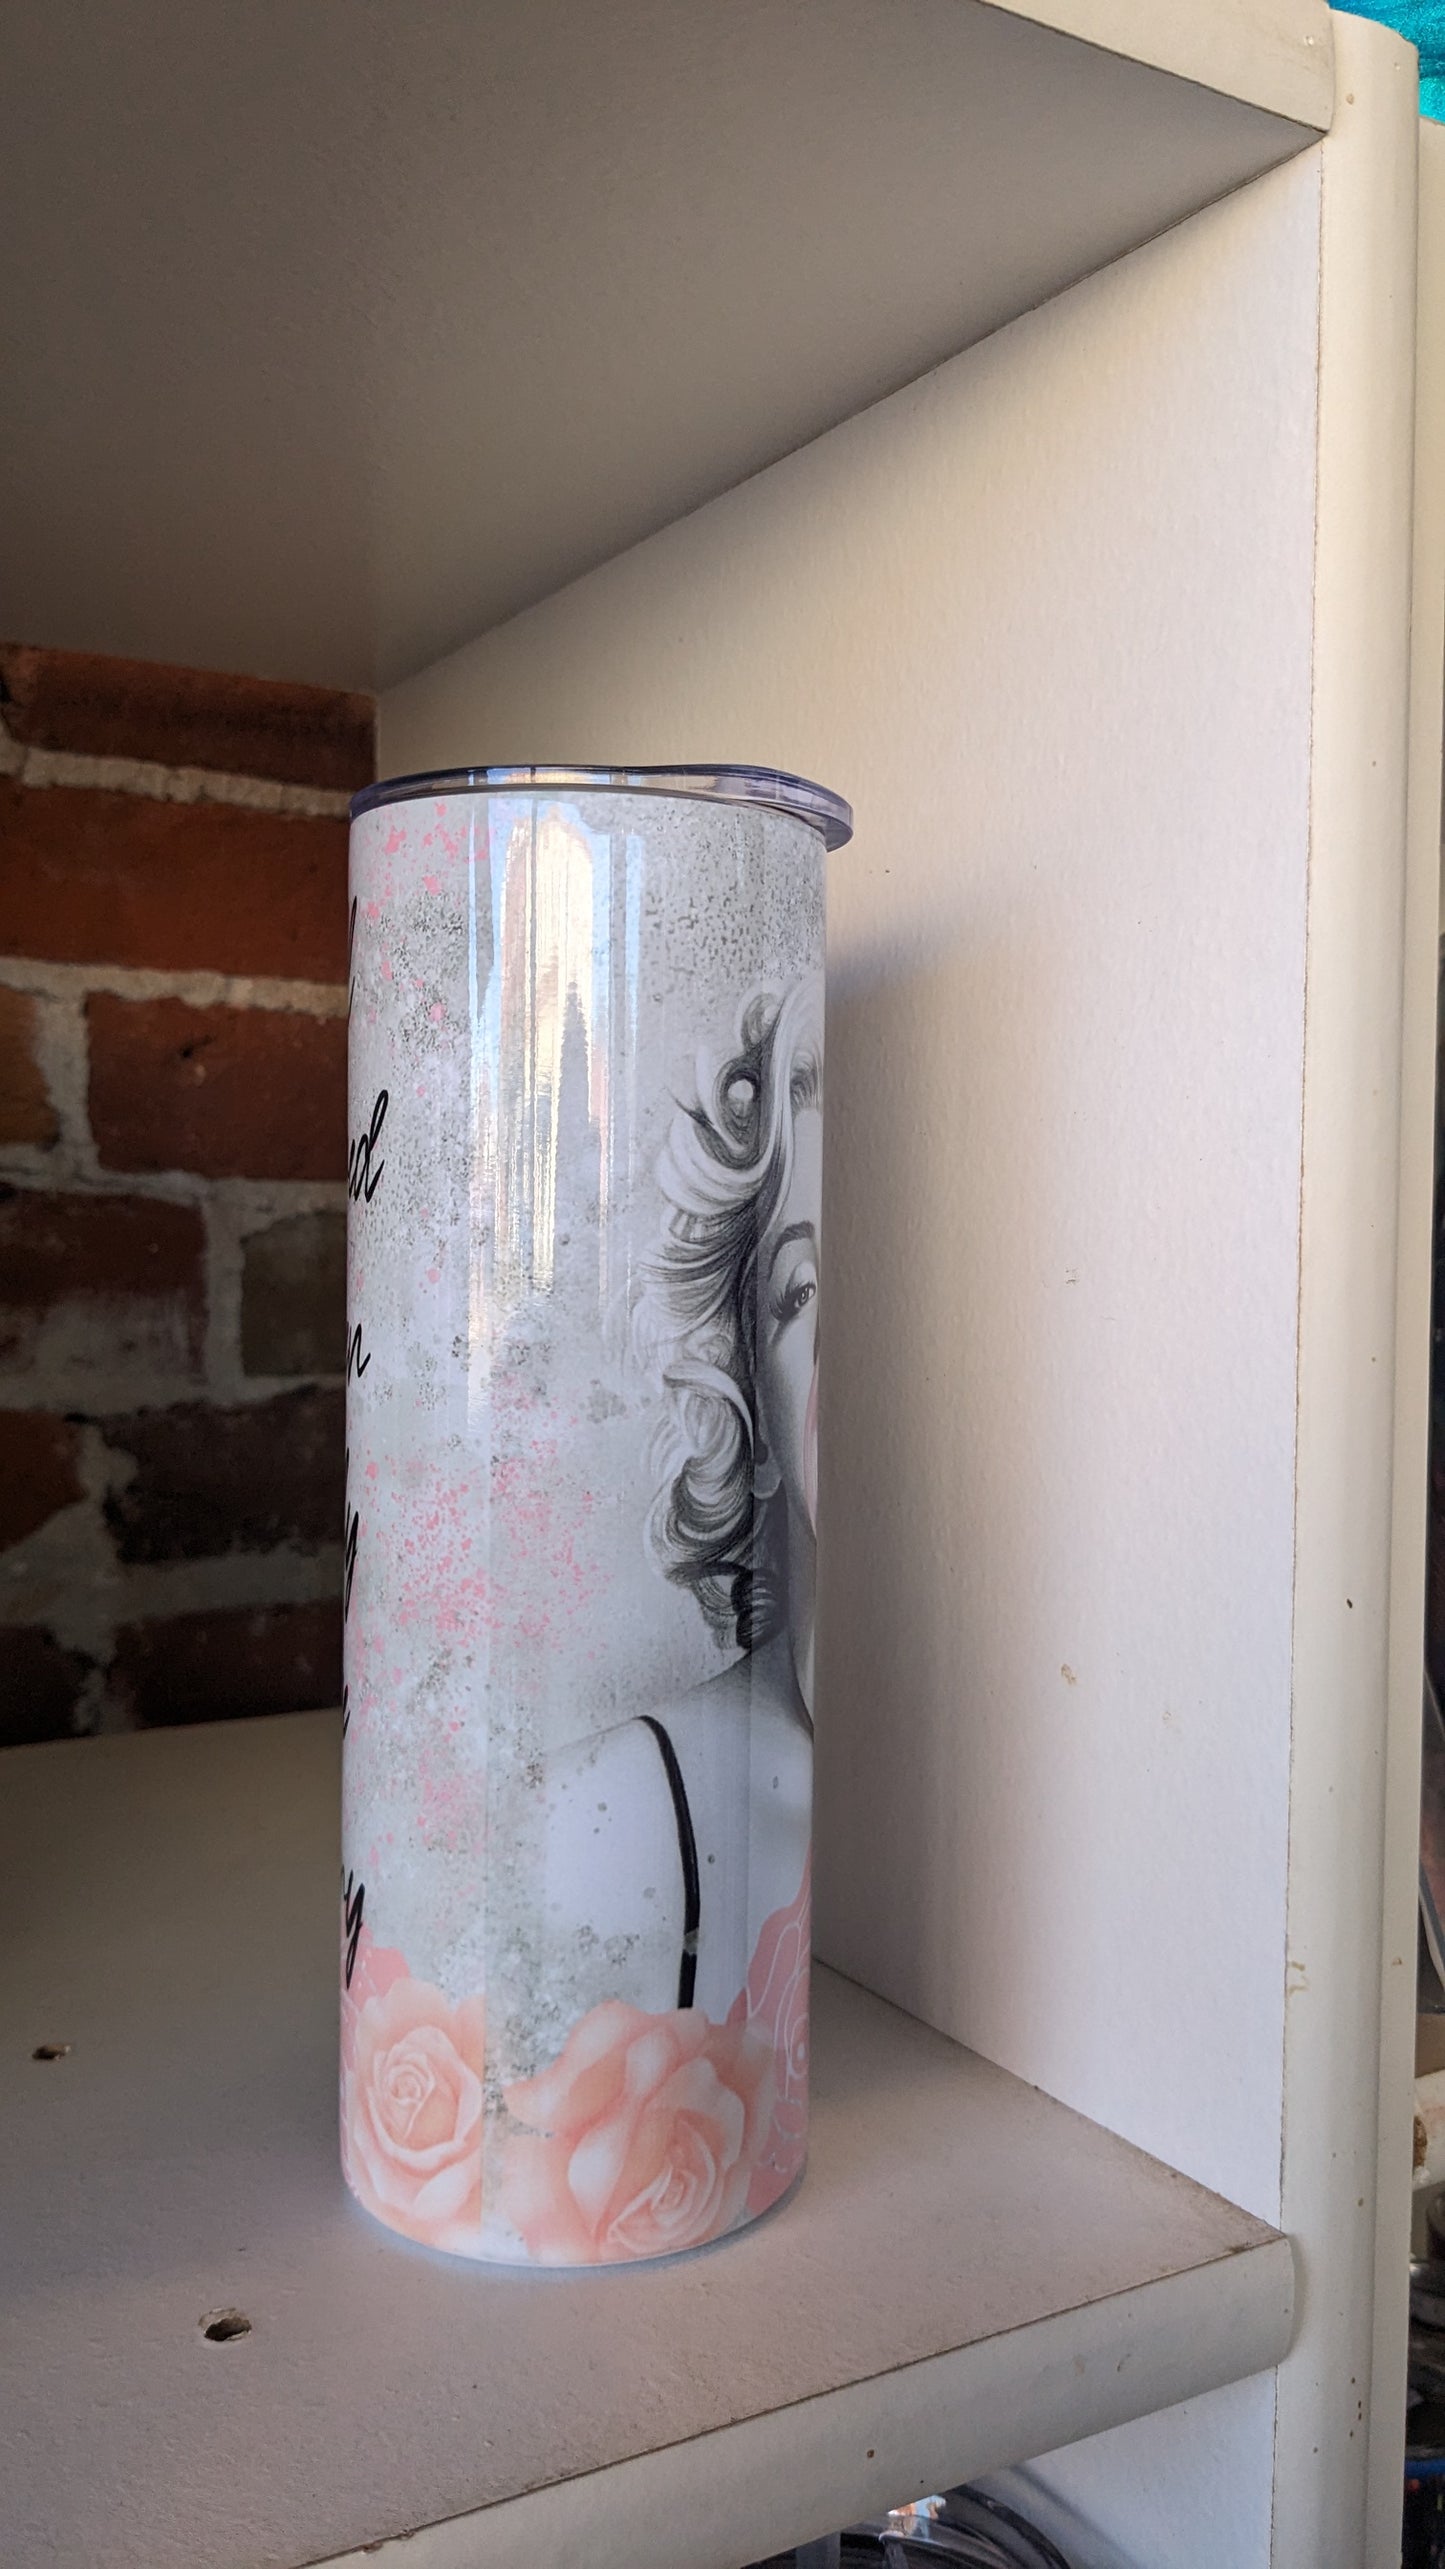 20 Oz Insulated Stainless Steel Tumbler Marilyn Monroe Well-behaved Women Rarely Make History